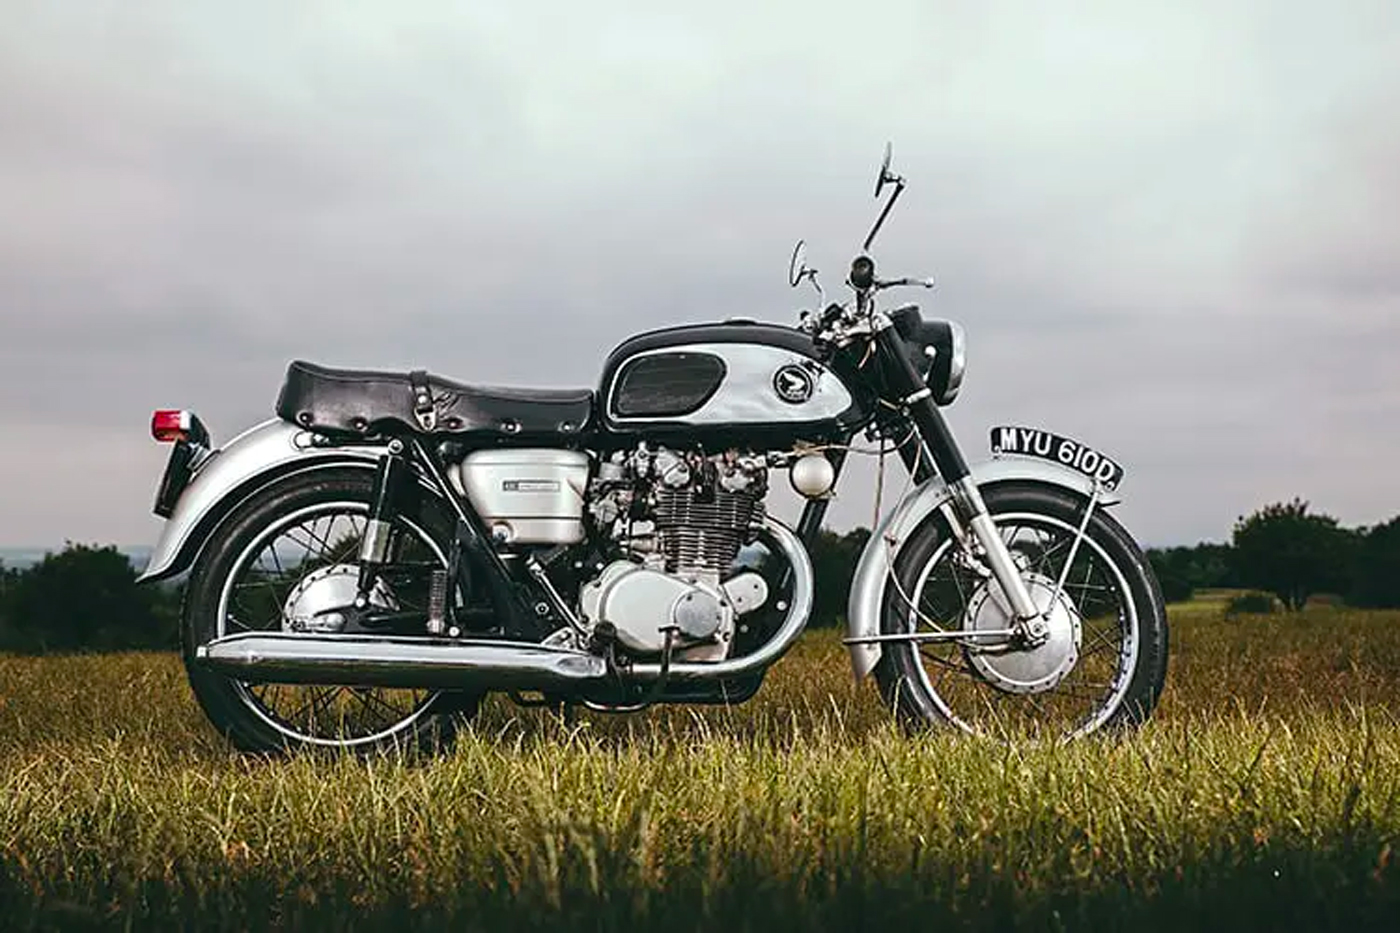 A classic Honda CB450 Black Bomber motorcycle is parked on grass at dusk on a cloudy day